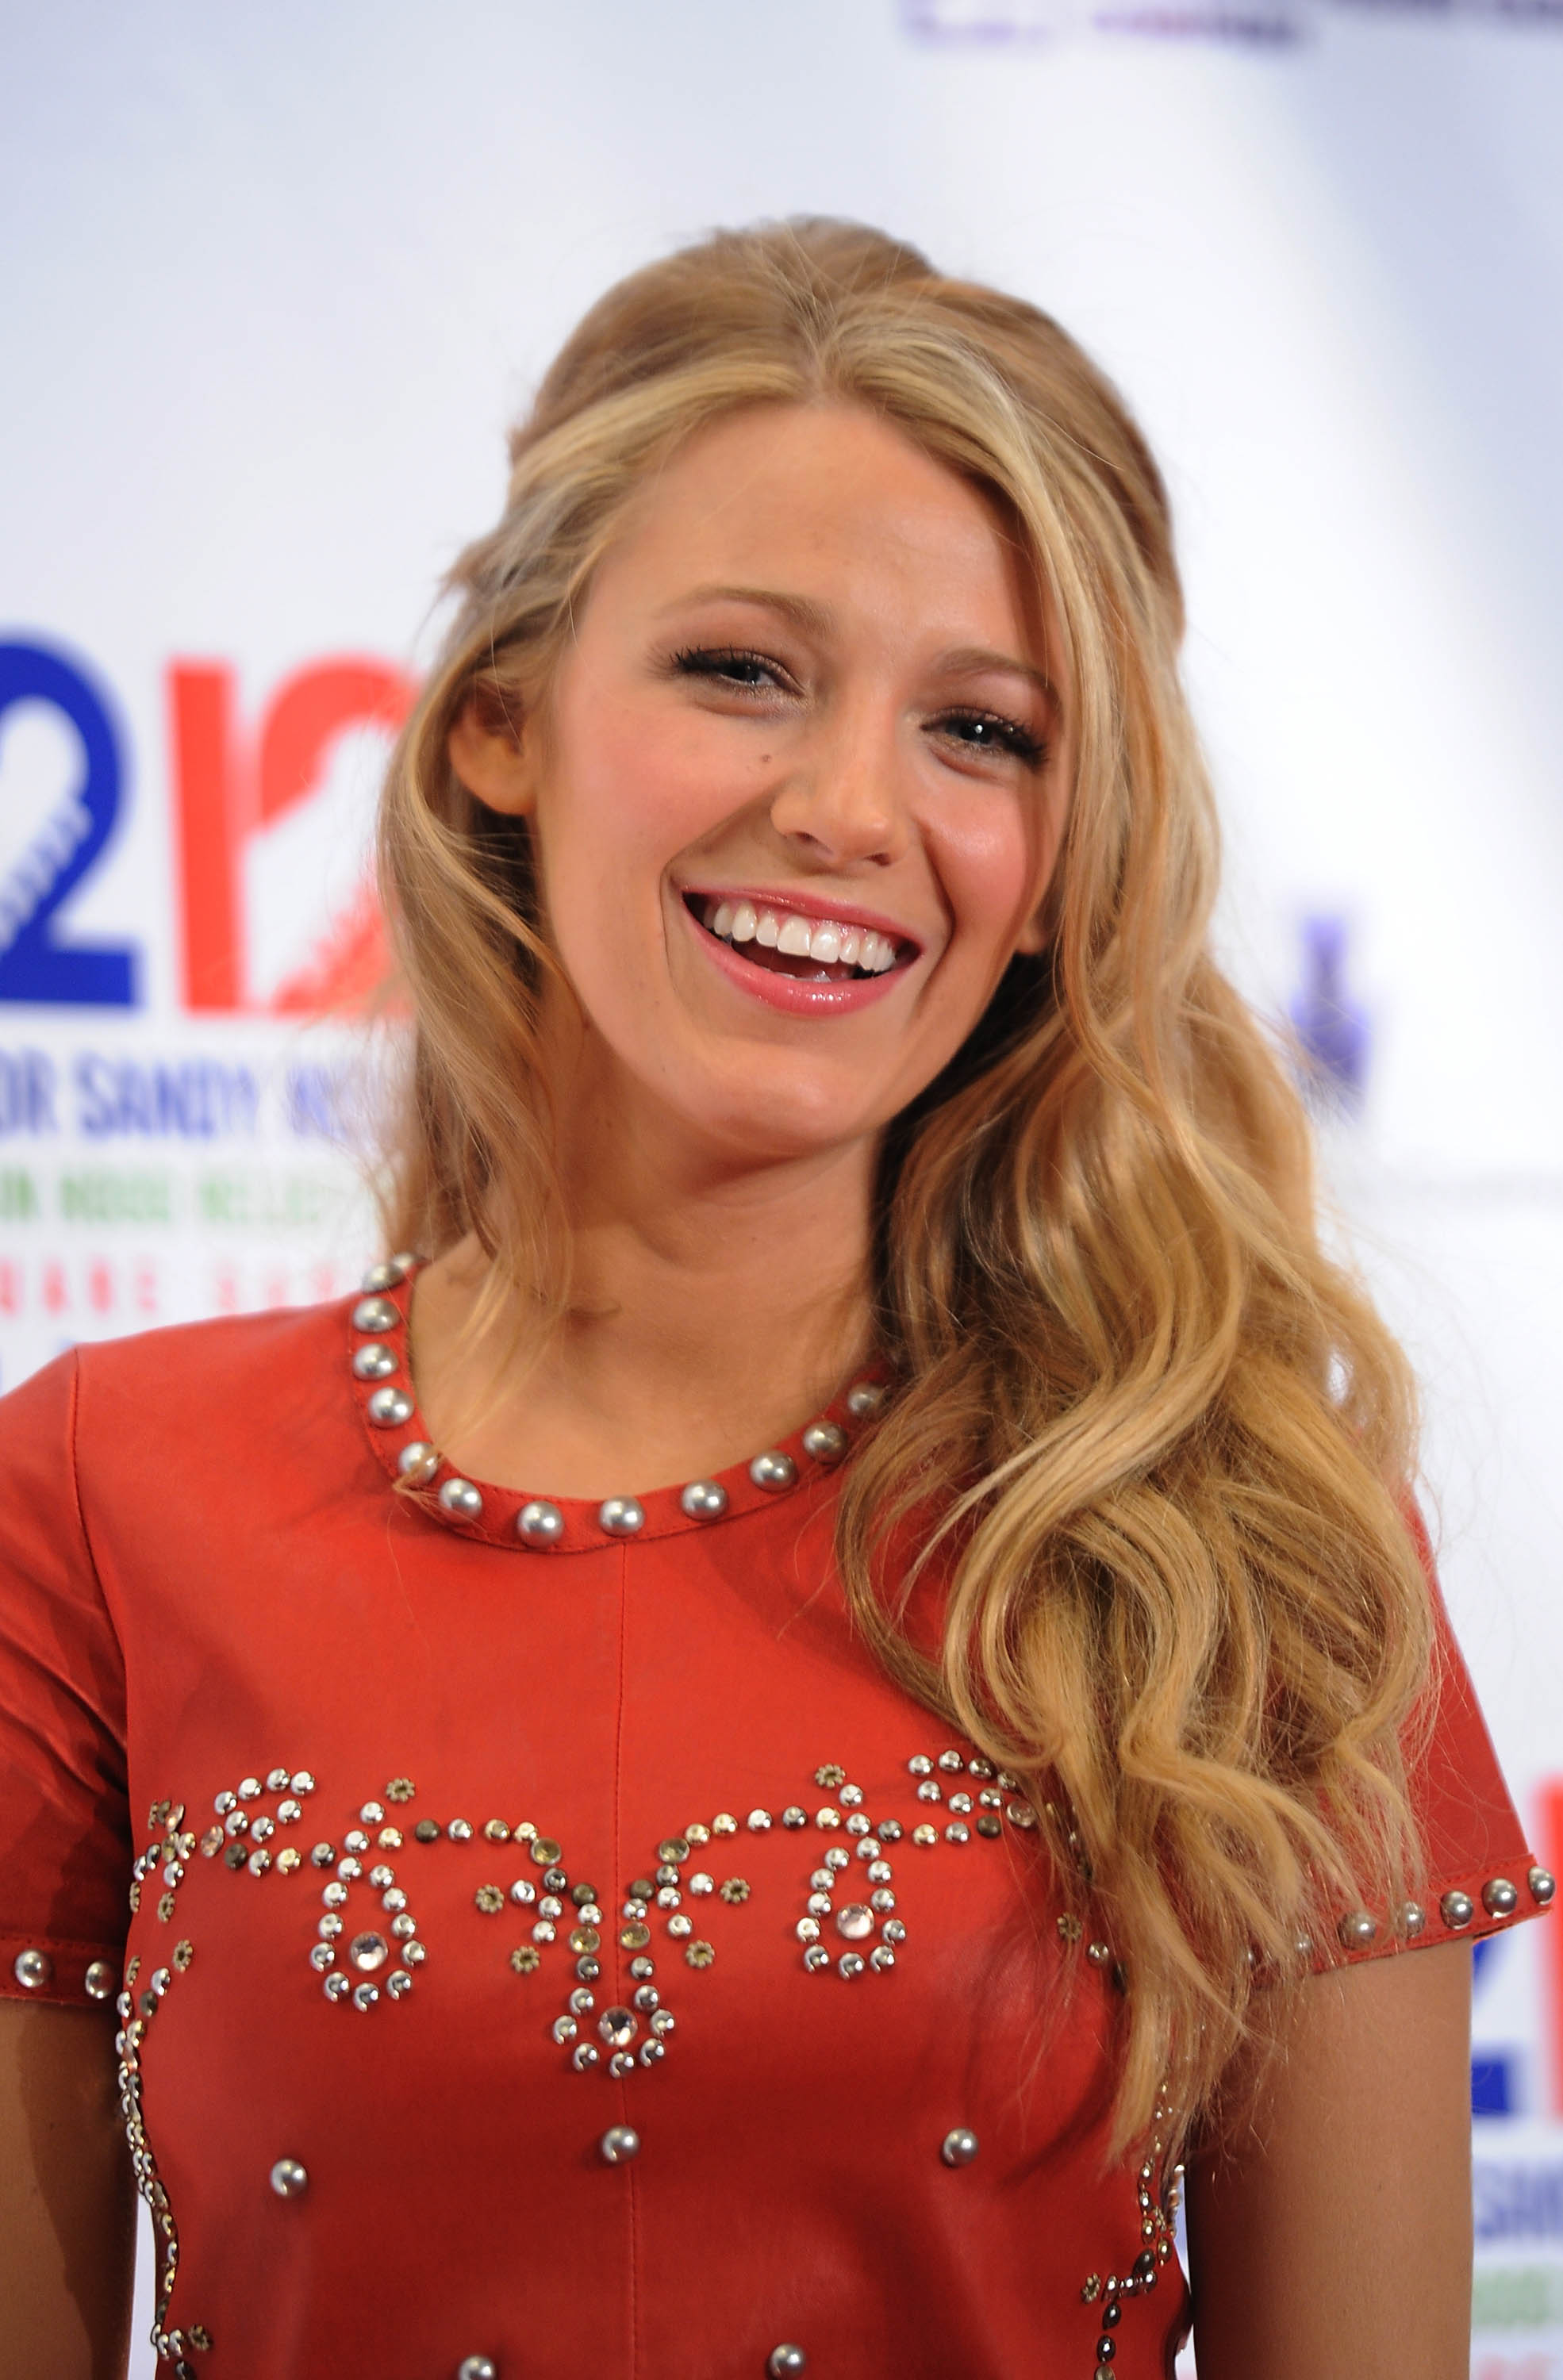 Blake Lively on December 12, 2012 in New York City. (Dimitrios Kambouris—Getty Images)